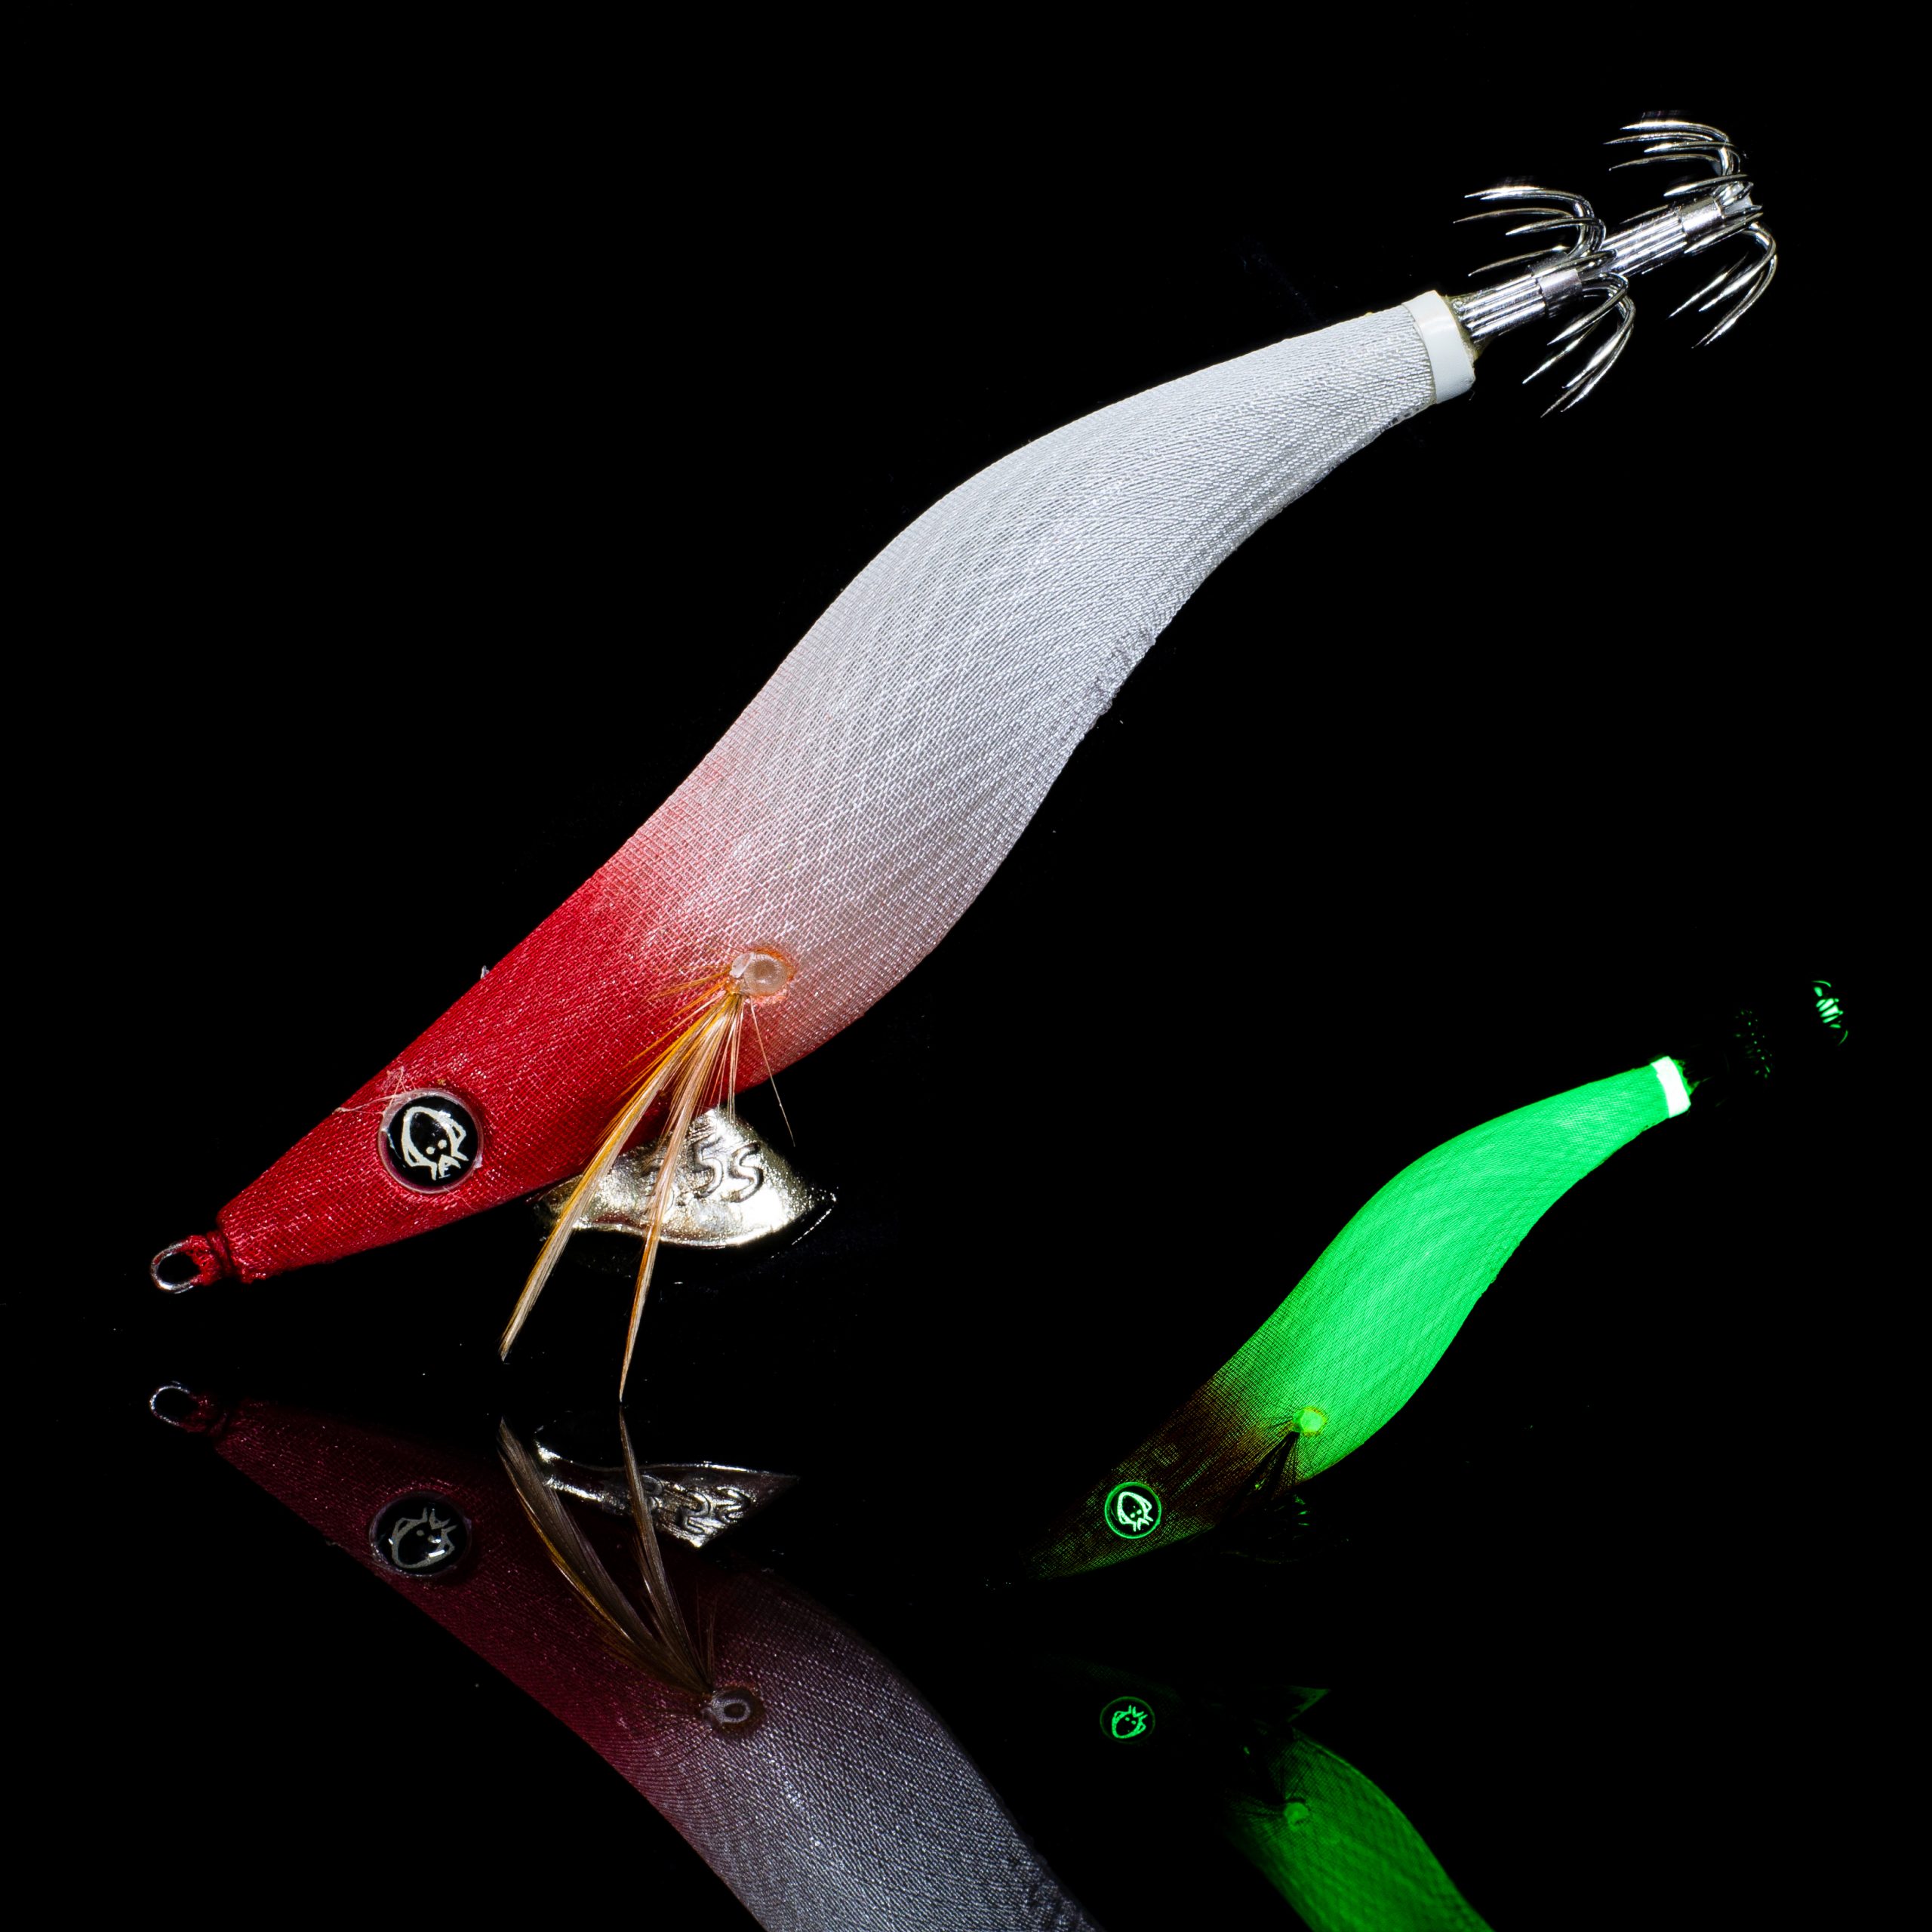 RUI KR56 SIZE 3.5 - The Angry Fish